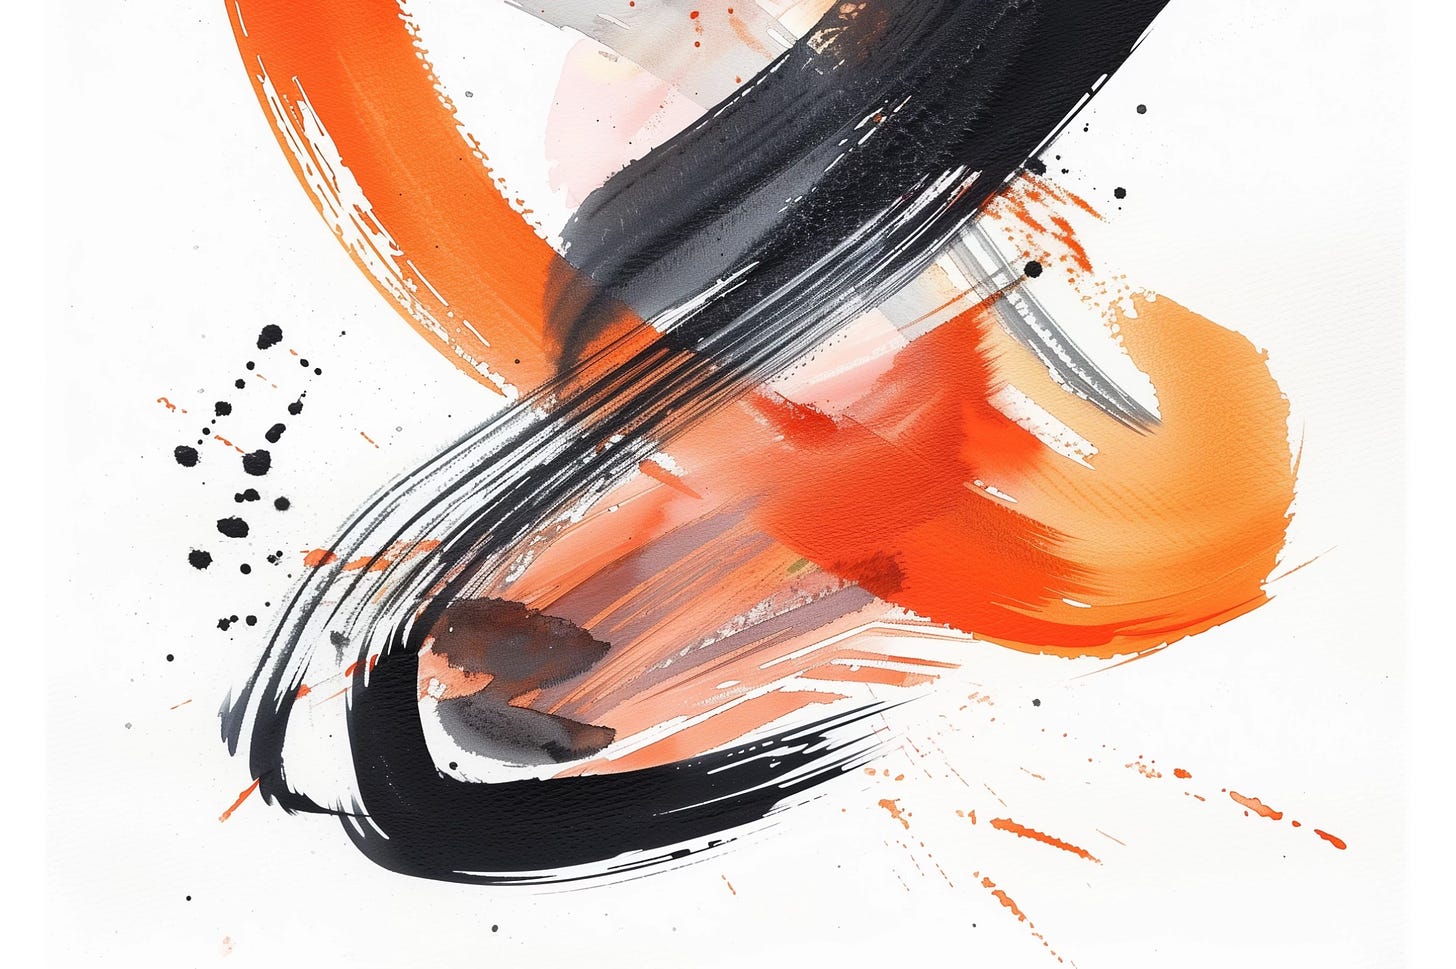 Abstract Japanese broad brushstrokes in black and orange watercolor with splatters forming a creative expression of thinking.